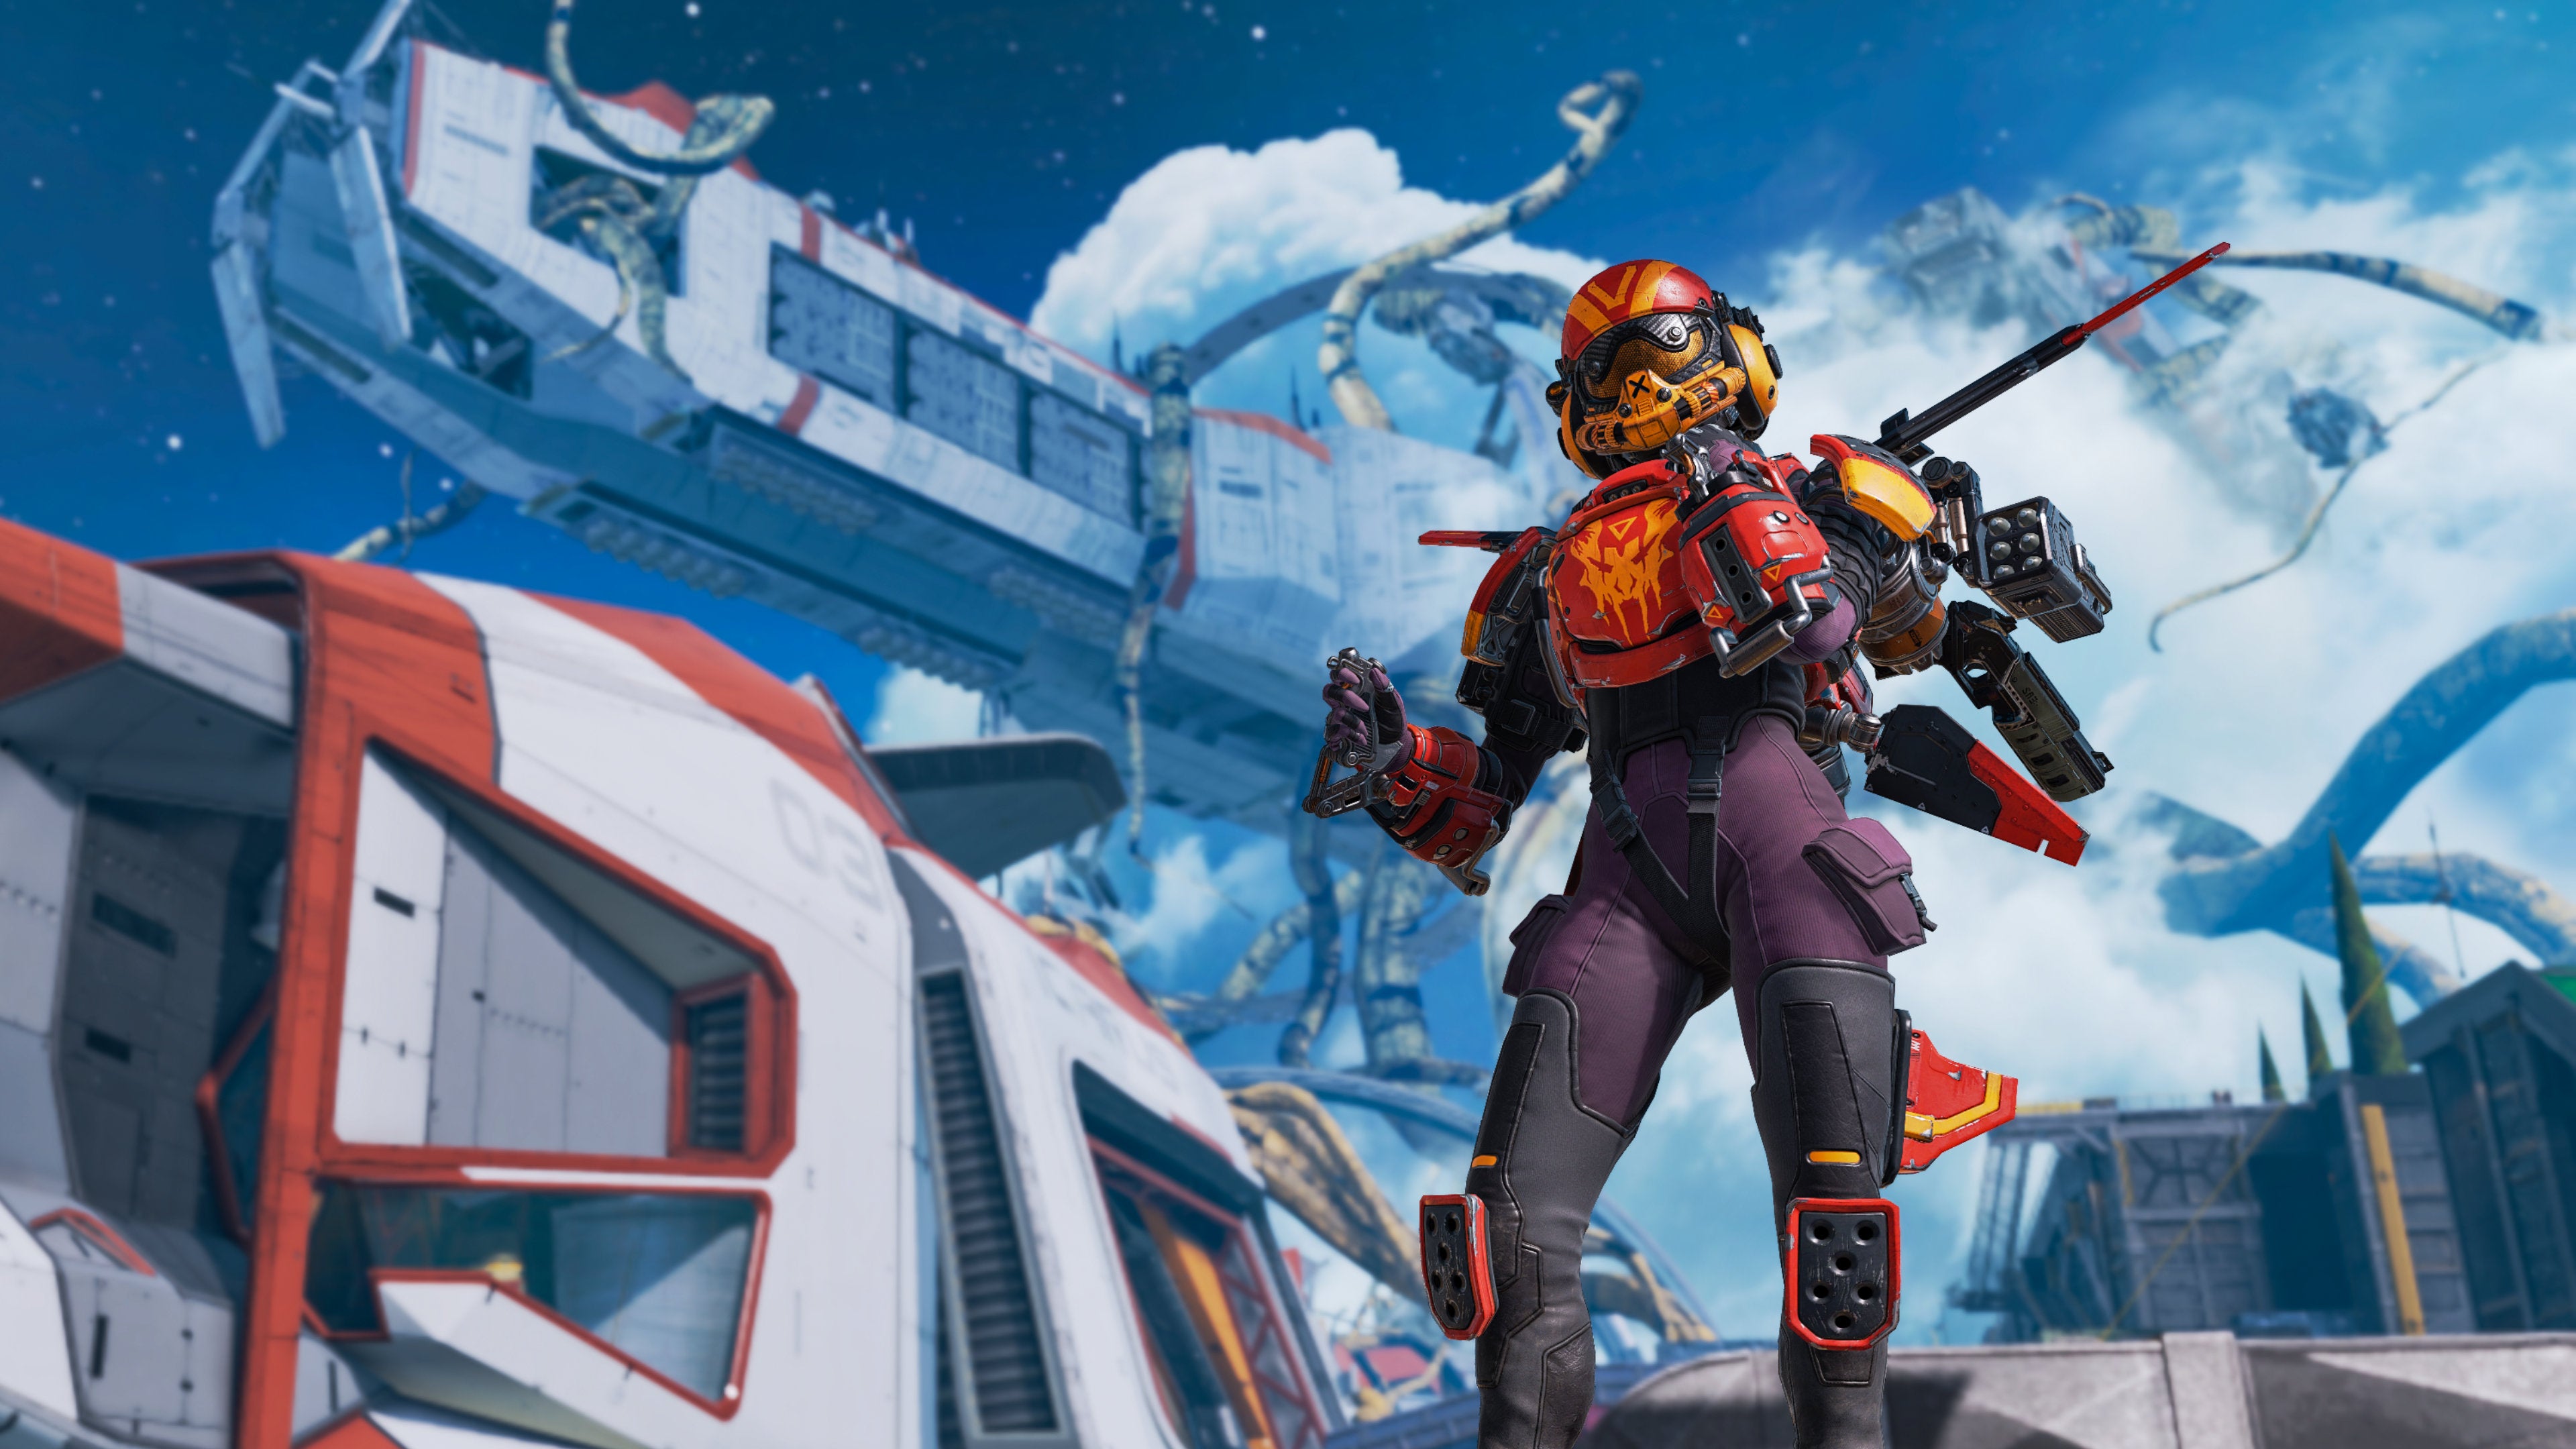 Promotional Apex Legends screenshot of Valkyrie standing on the Olympus map wearing one of her Legendary skins.